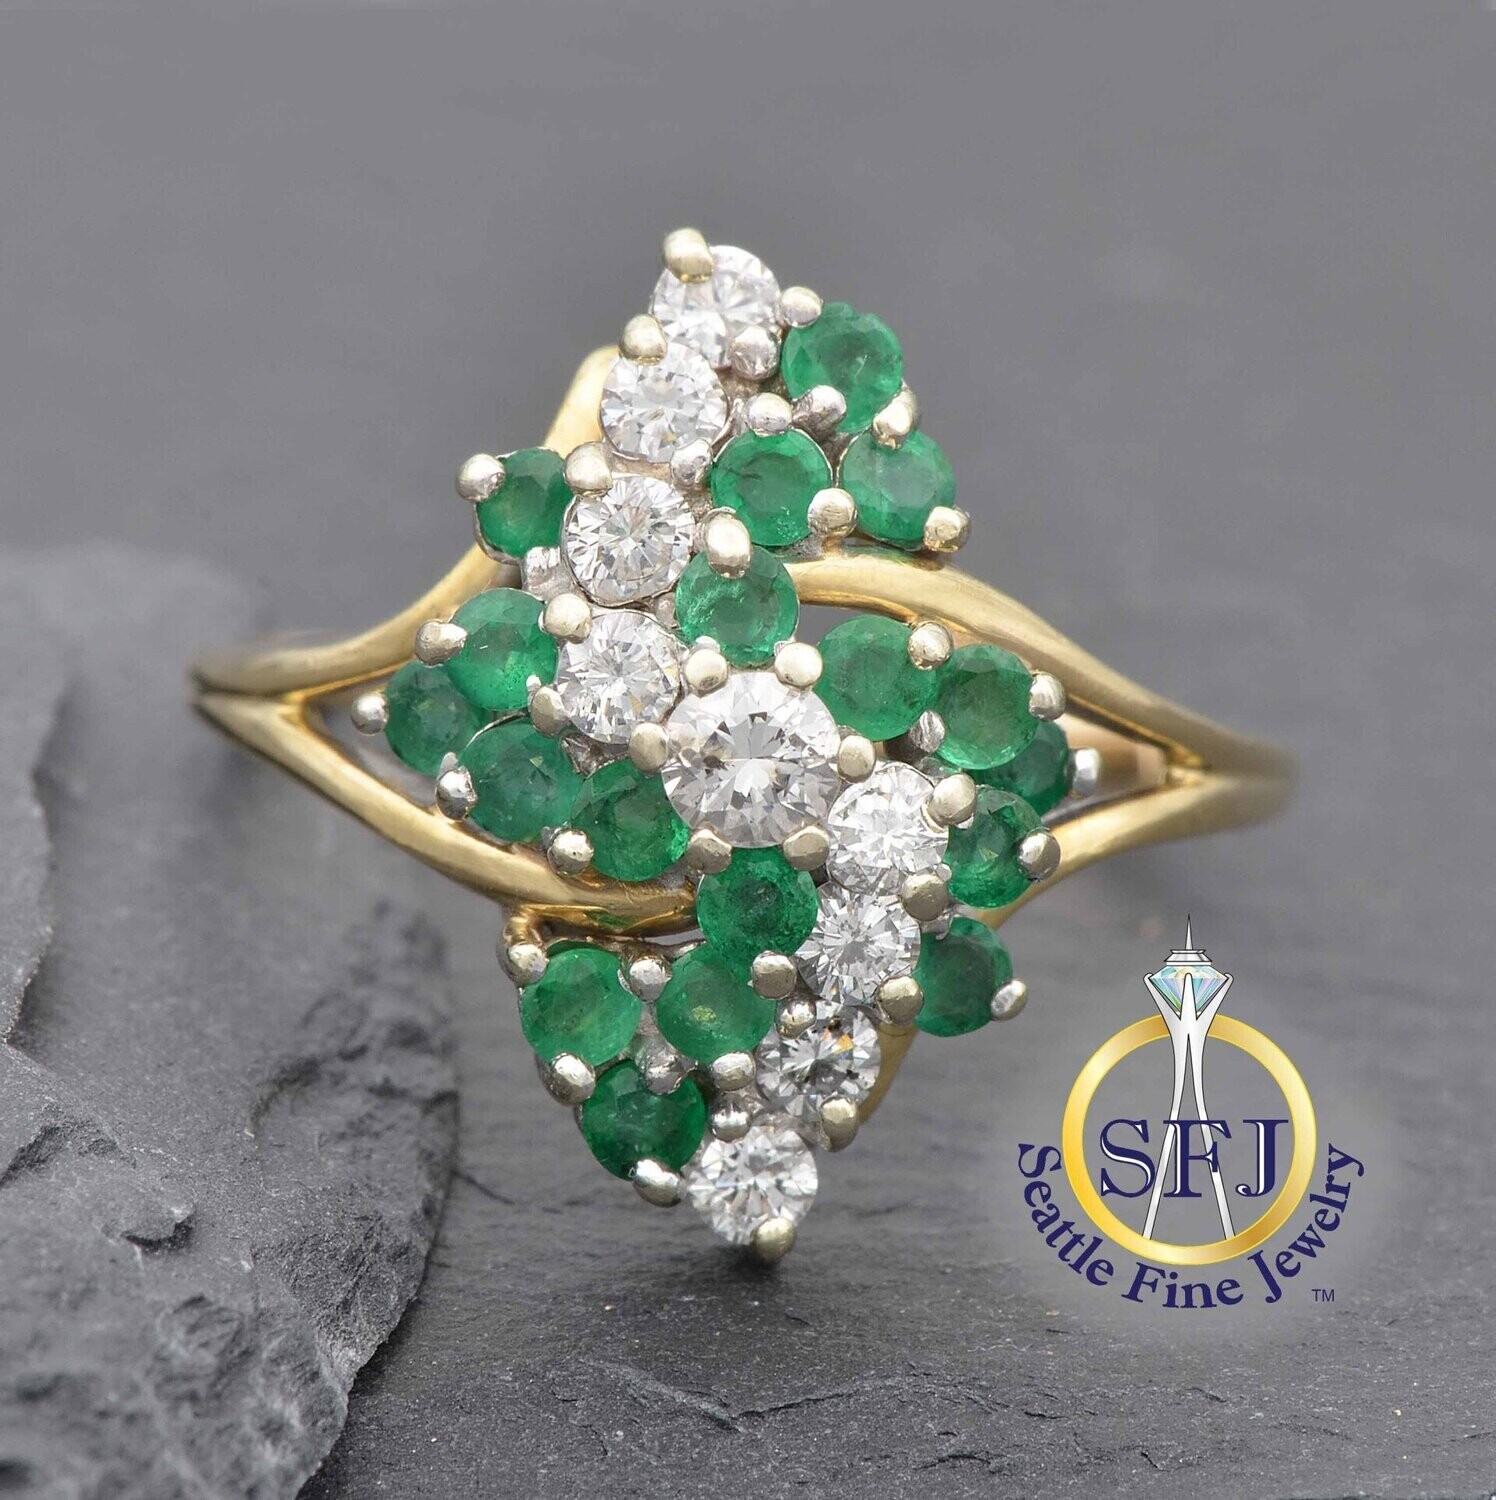 Emerald and Diamond S-Curve Cluster Ring, Solid 14K Yellow Gold